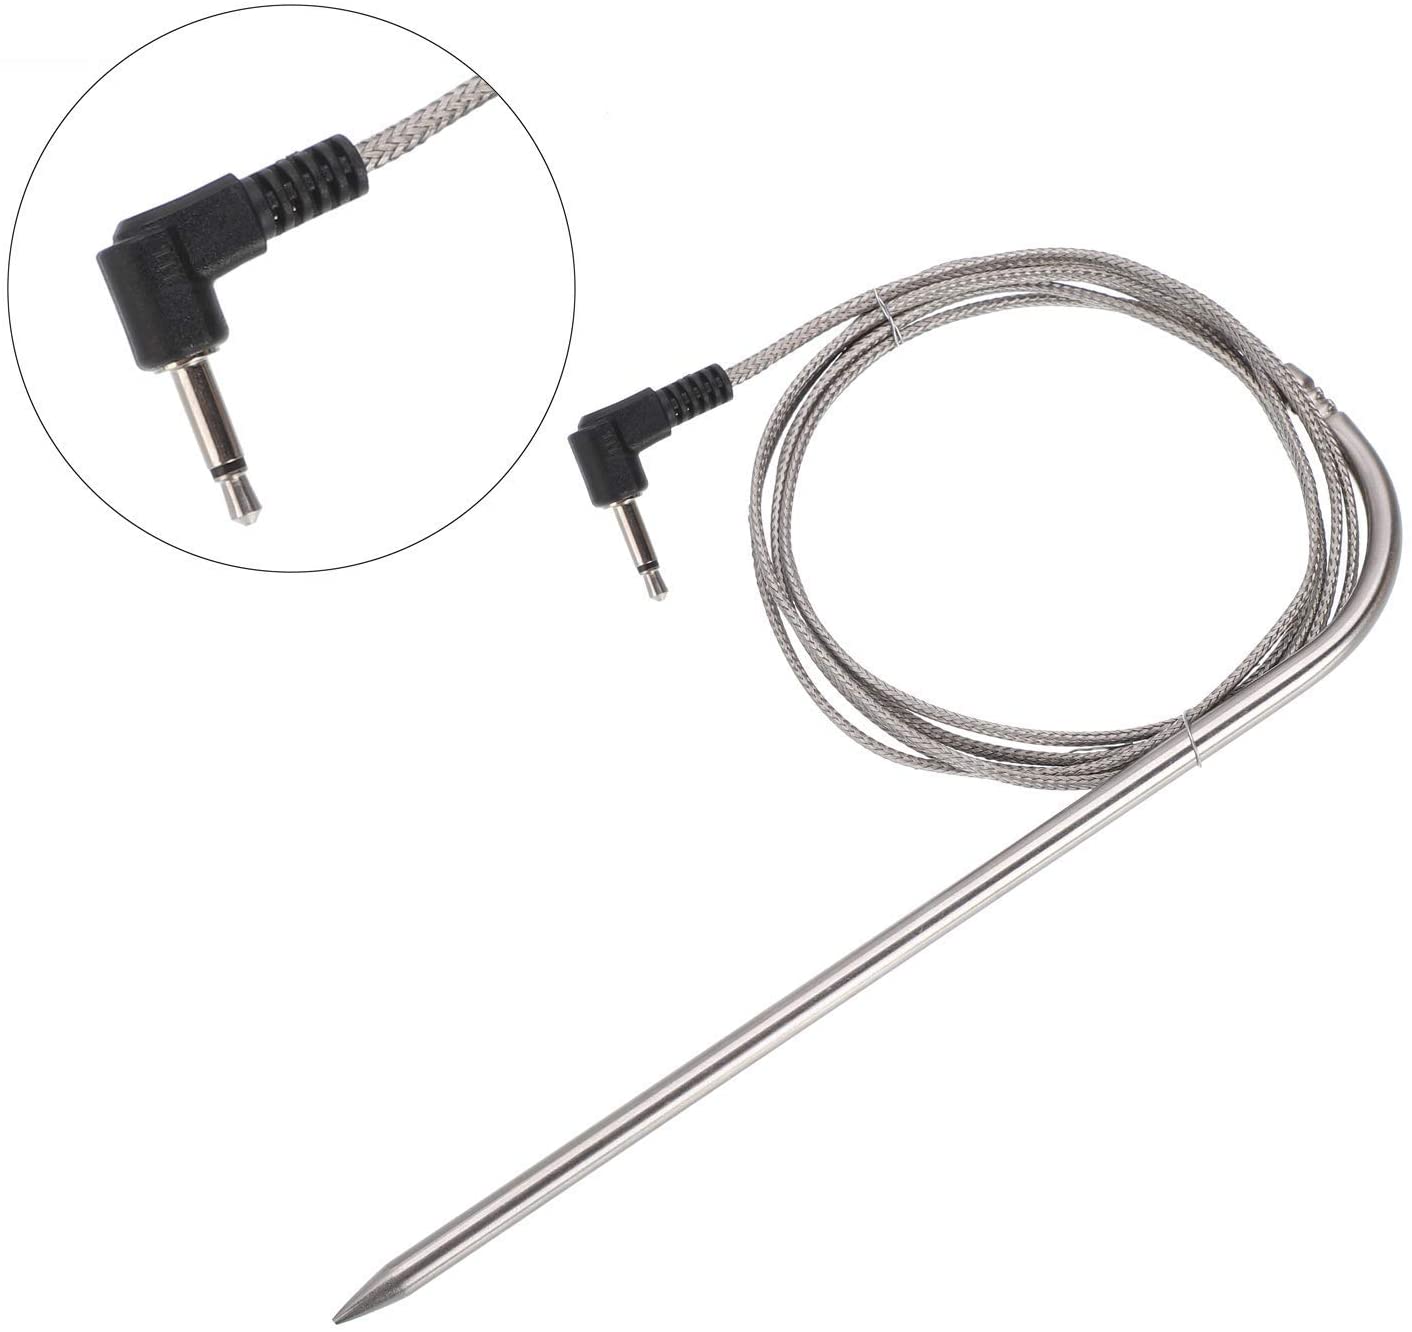 Waterproof Thermometer Hybrid Probe Replacement for Digital